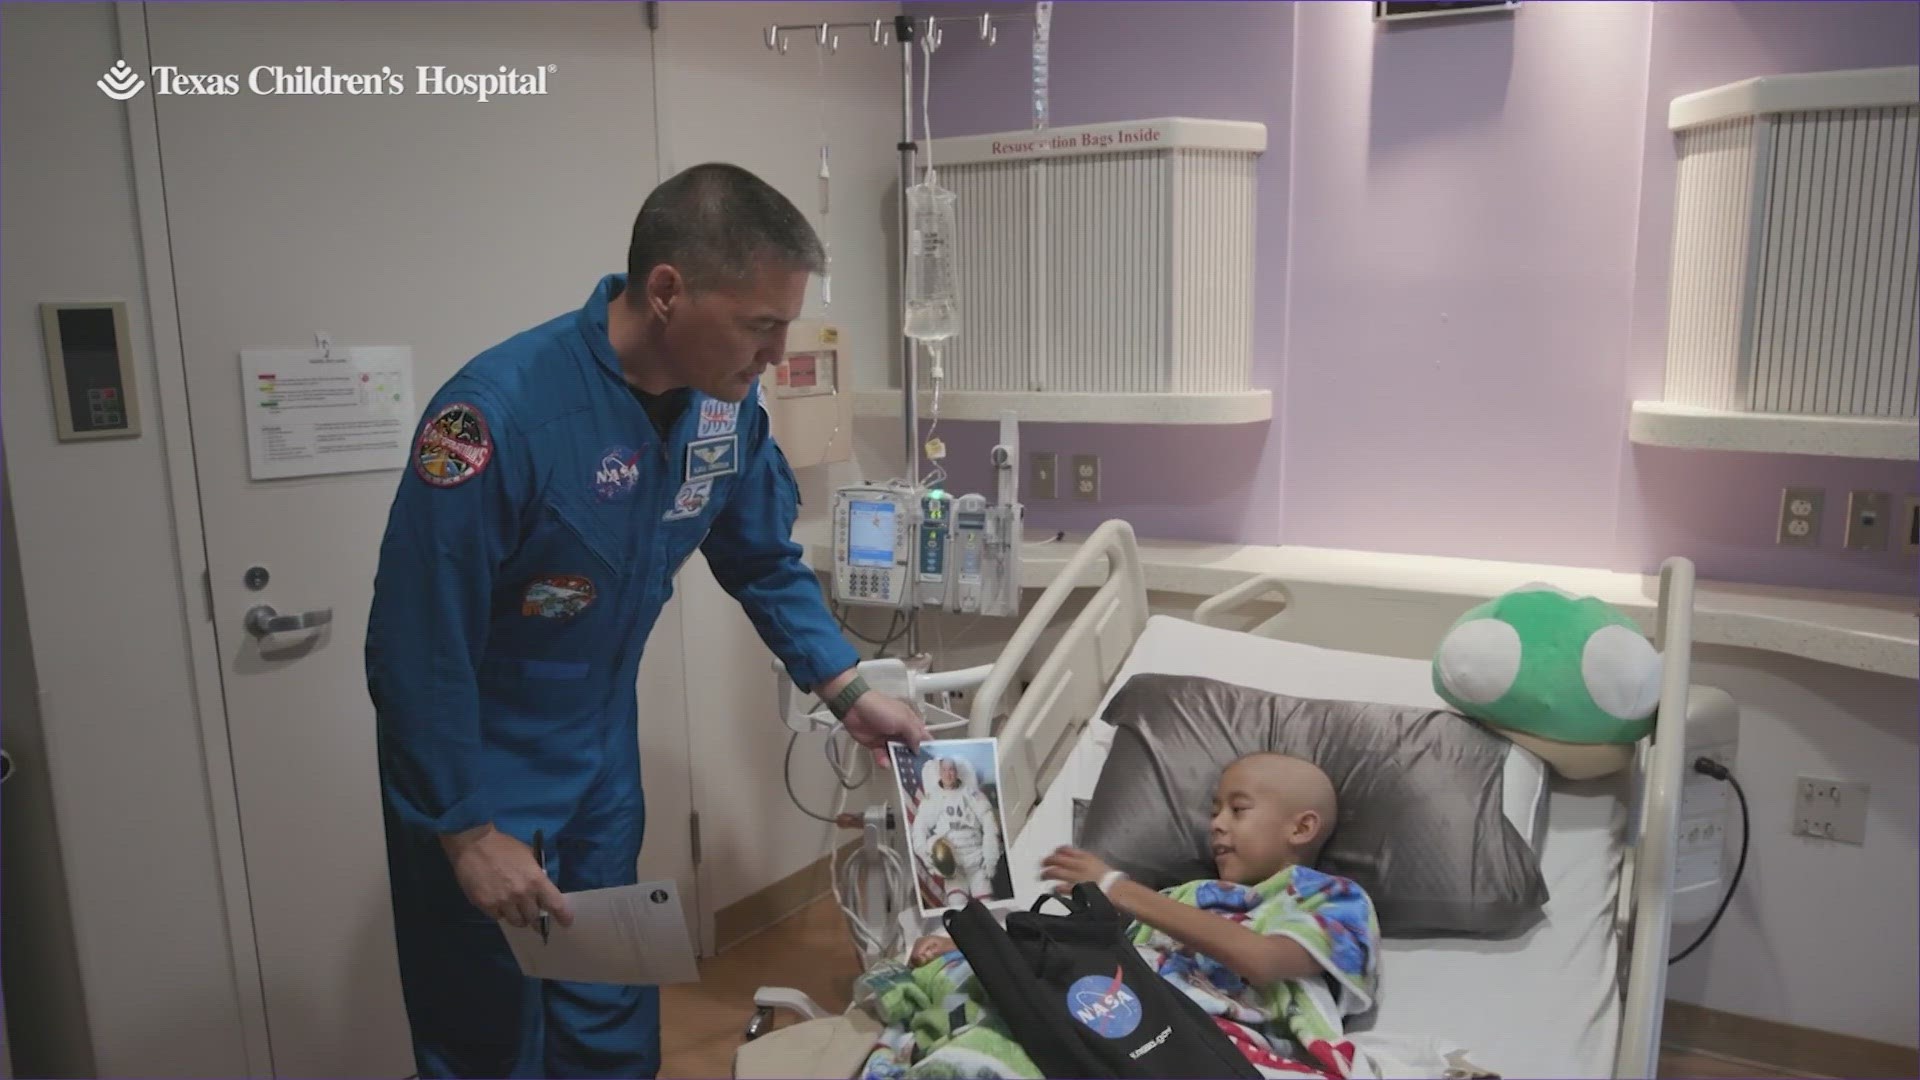 The patients at Texas Children's Hospital got some out-of-this-world visitors.